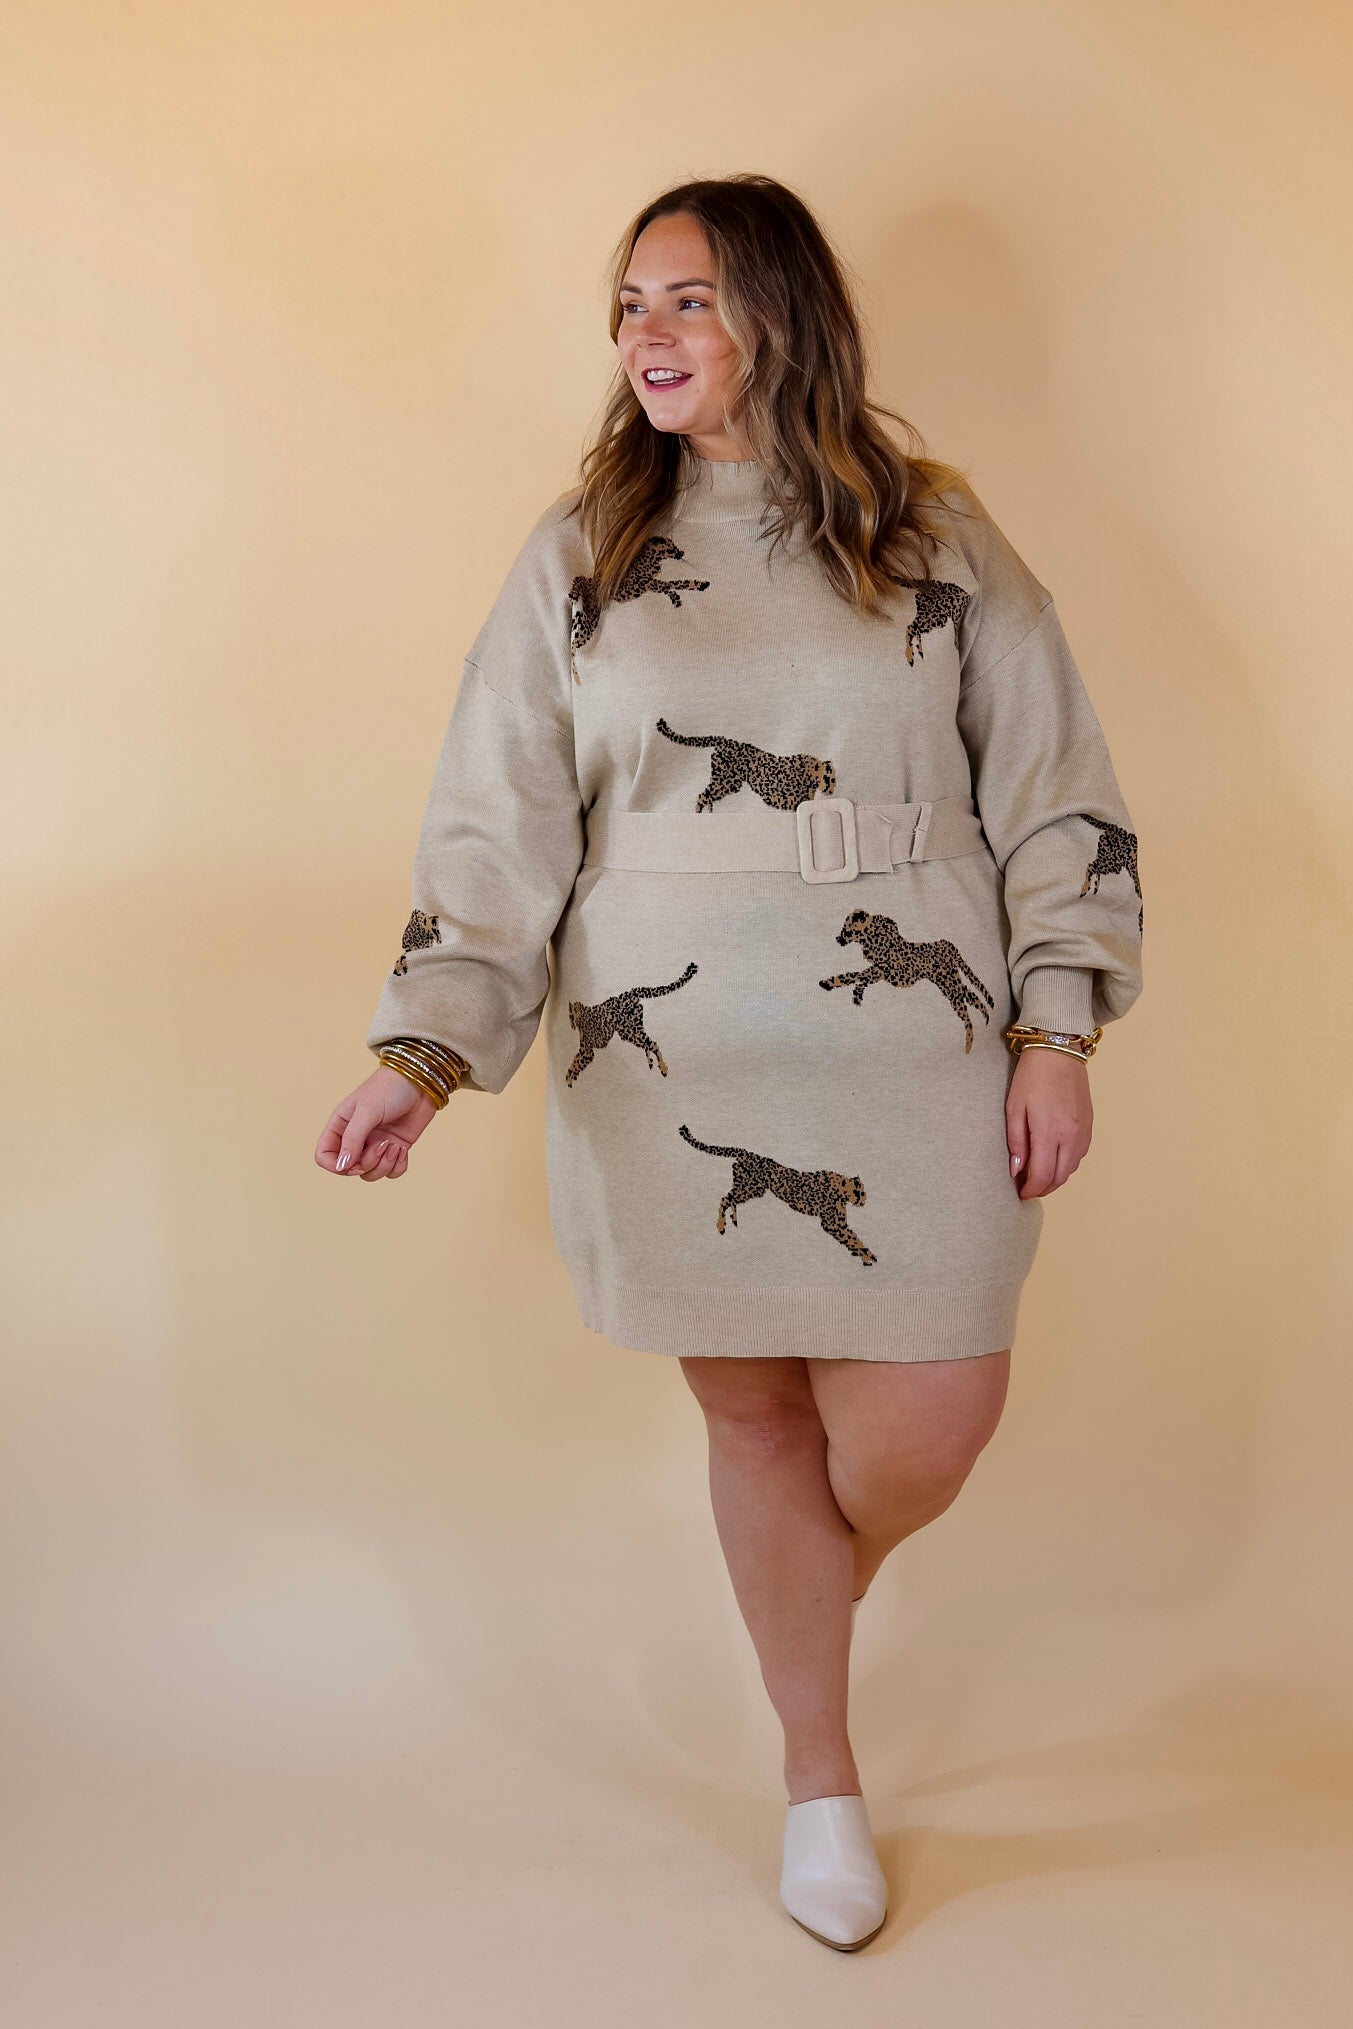 Luxurious Life Animal Print Sweater Dress with Belt in Oatmeal Beige - Giddy Up Glamour Boutique